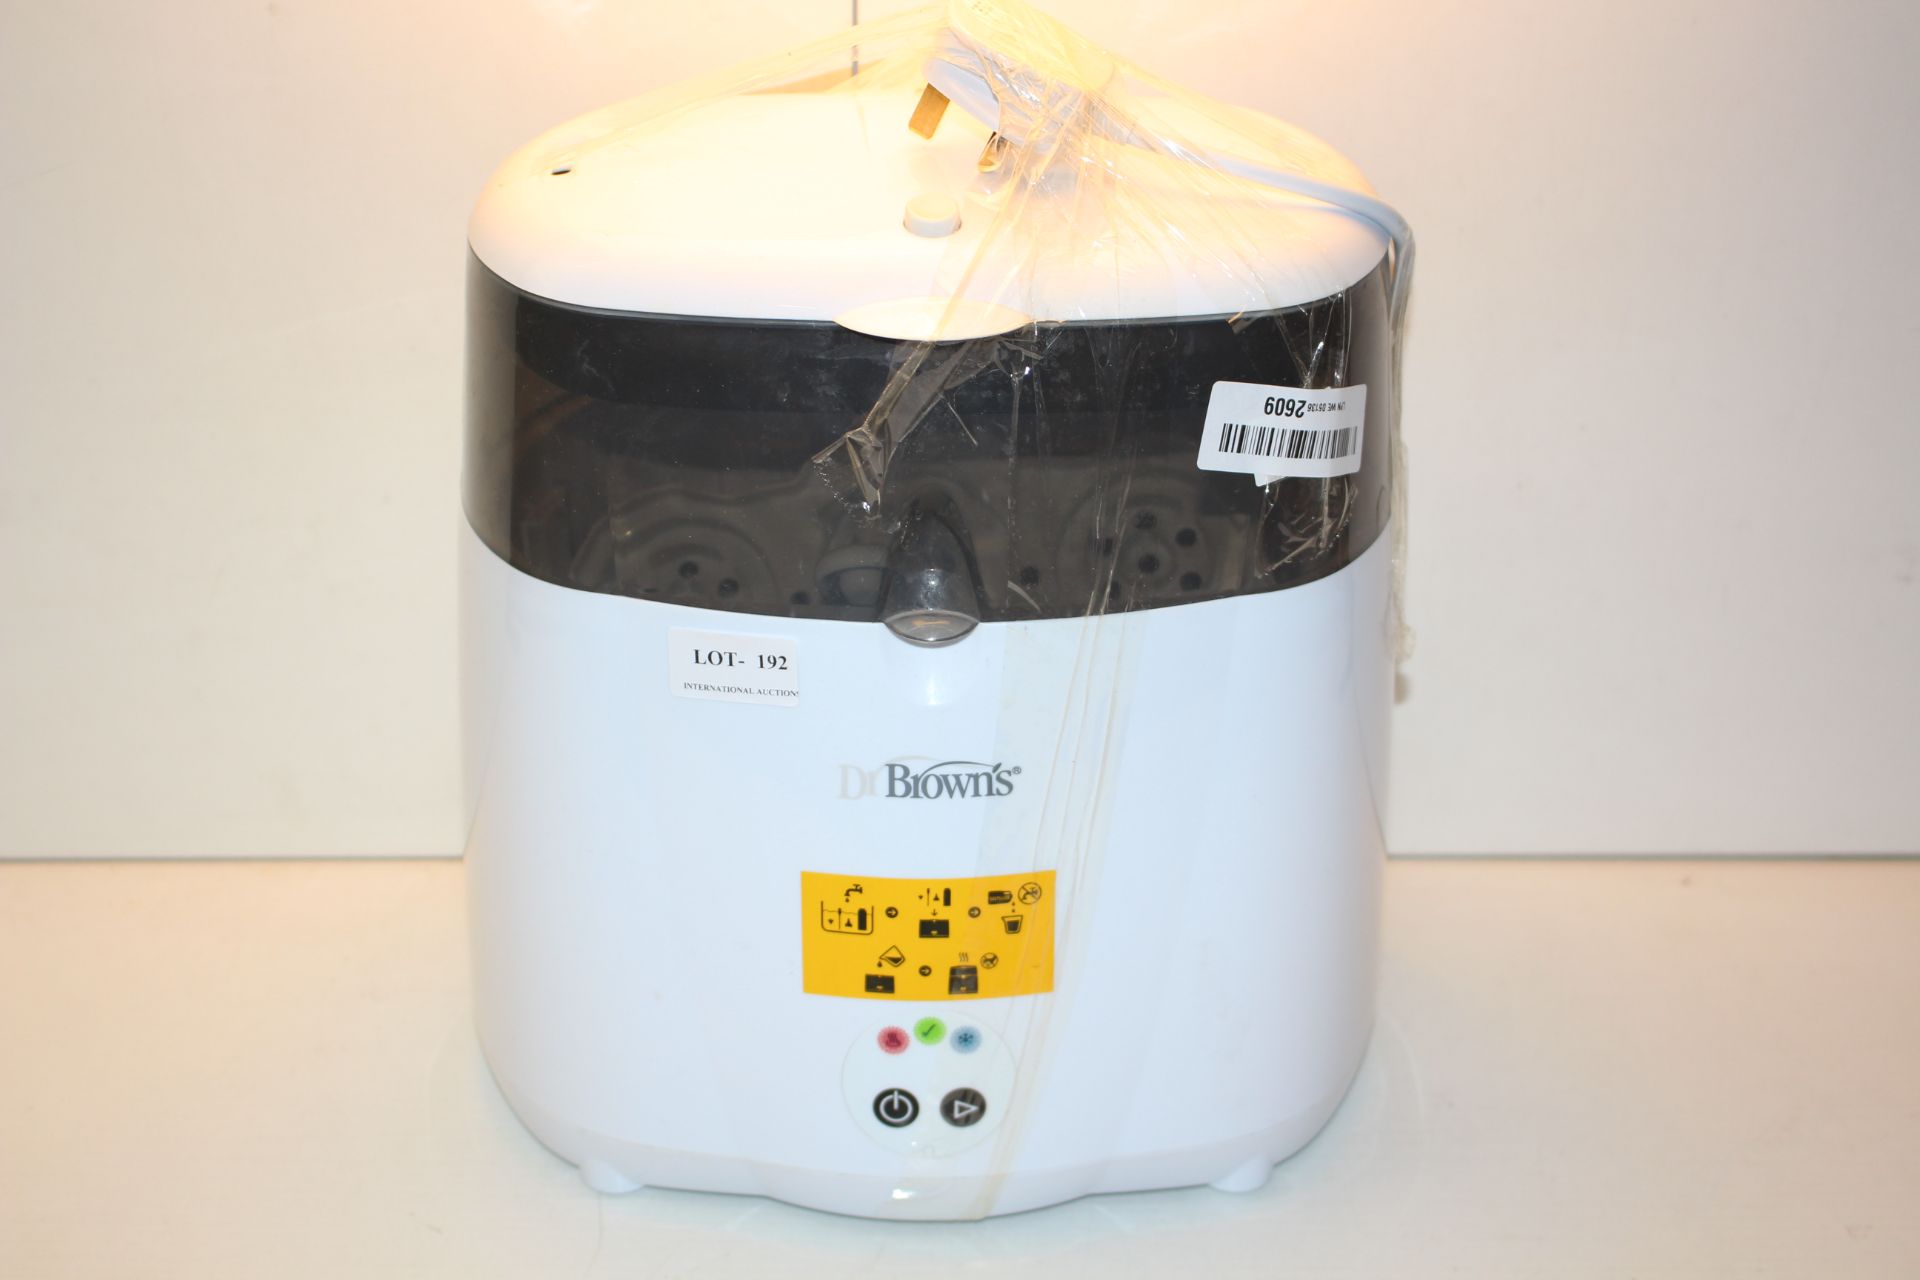 UNBOXED DR BROWNS BOTTLE ELECTRIC STERILIZER Condition ReportAppraisal Available on Request- All